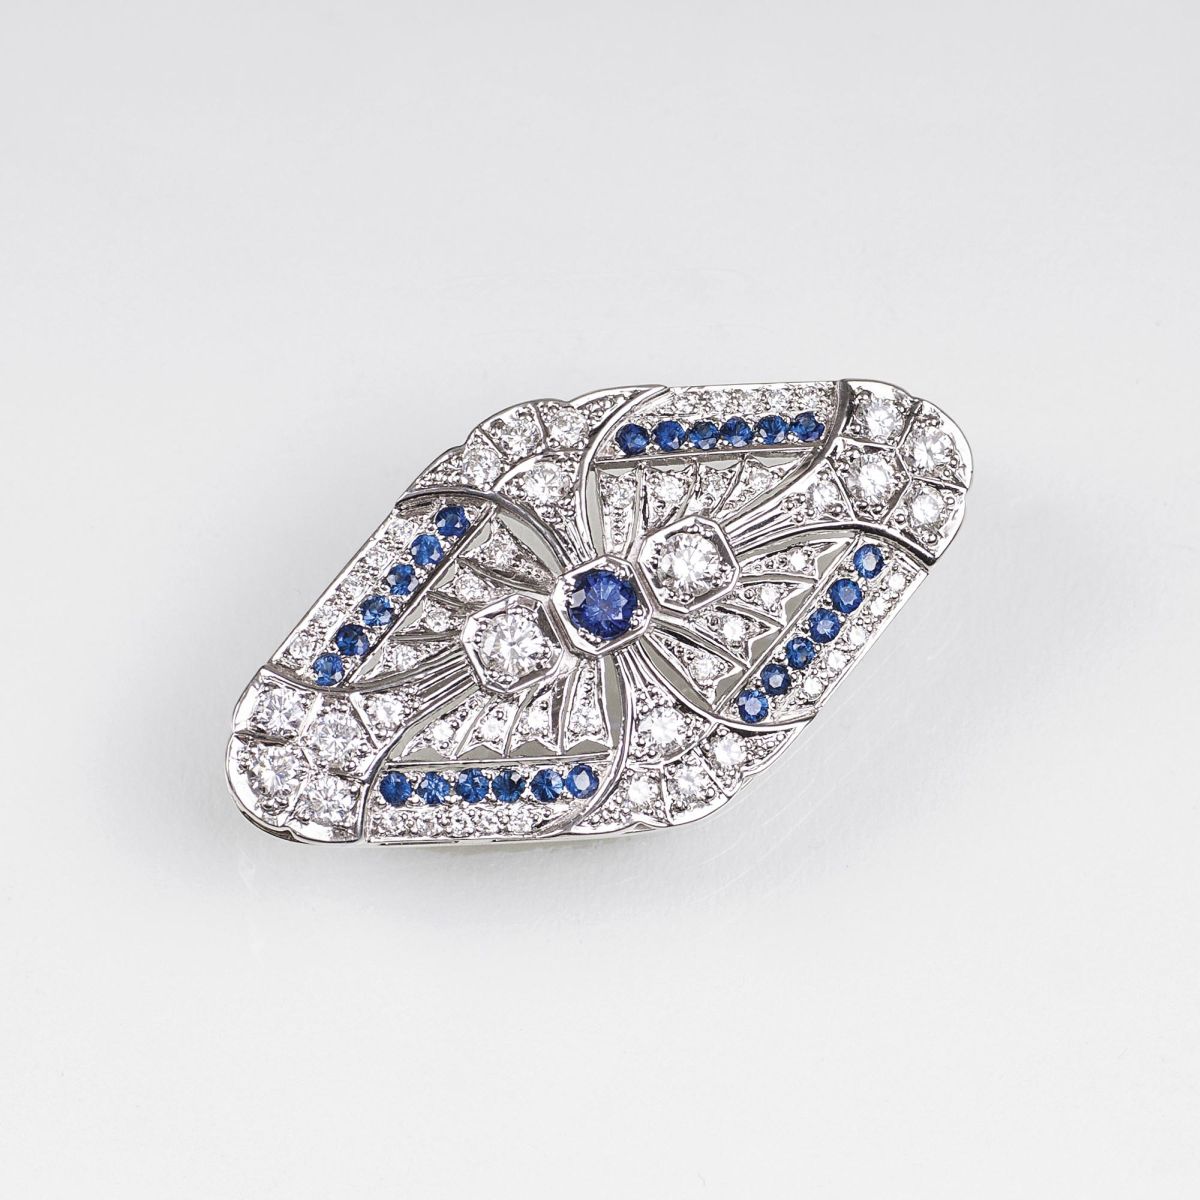 A Diamond Sapphire Brooch in the style of Art-Déco